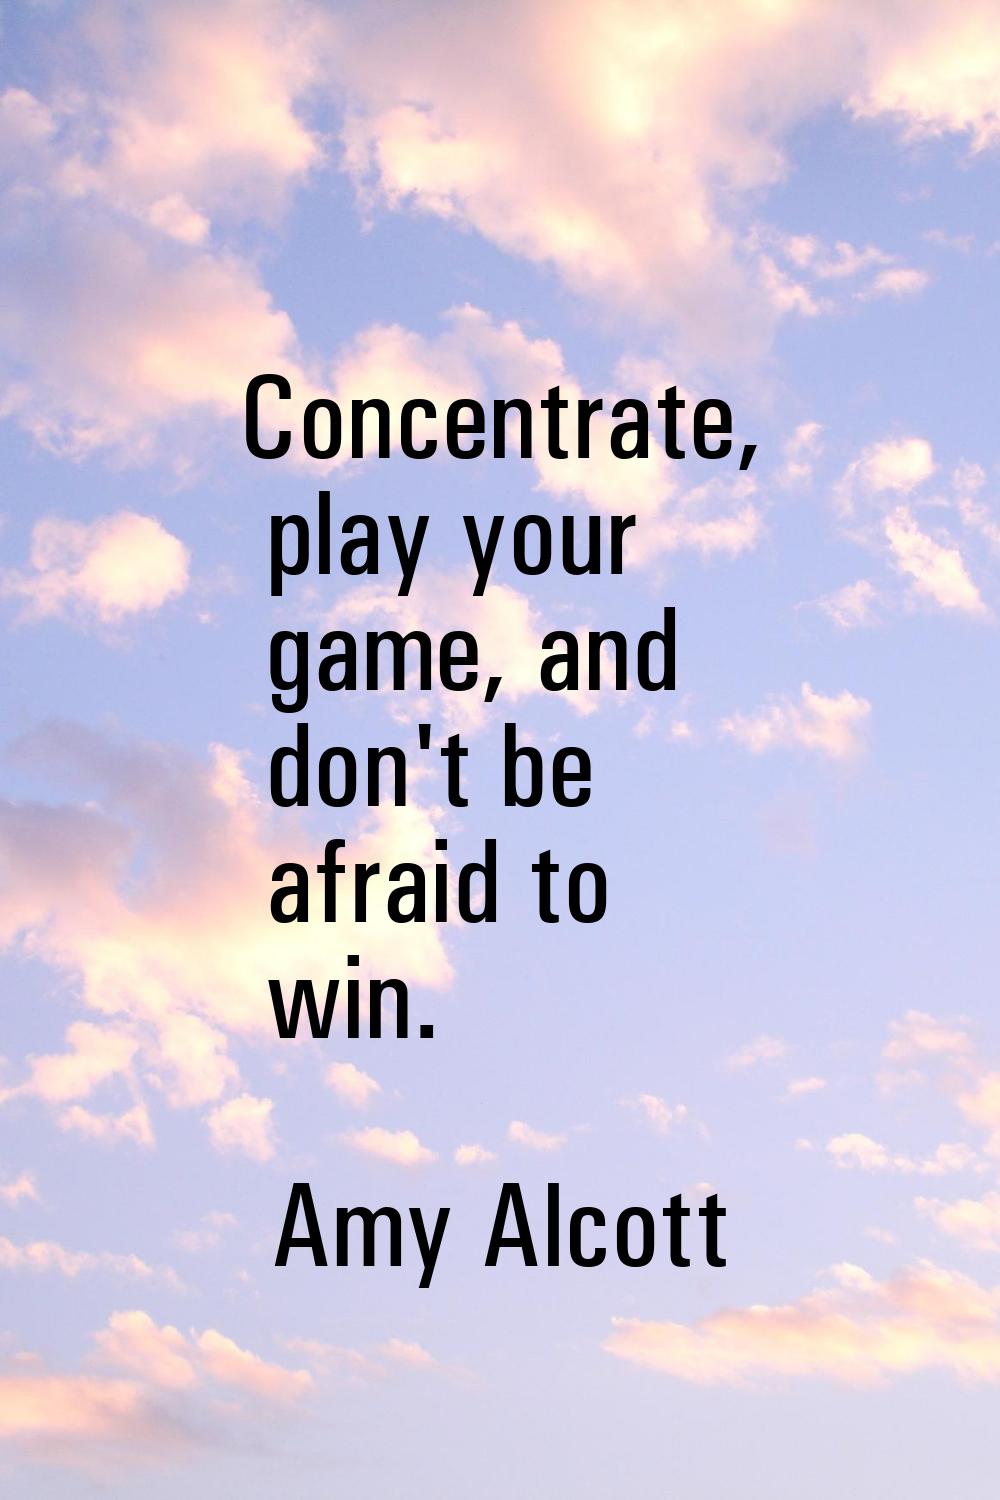 Concentrate, play your game, and don't be afraid to win.